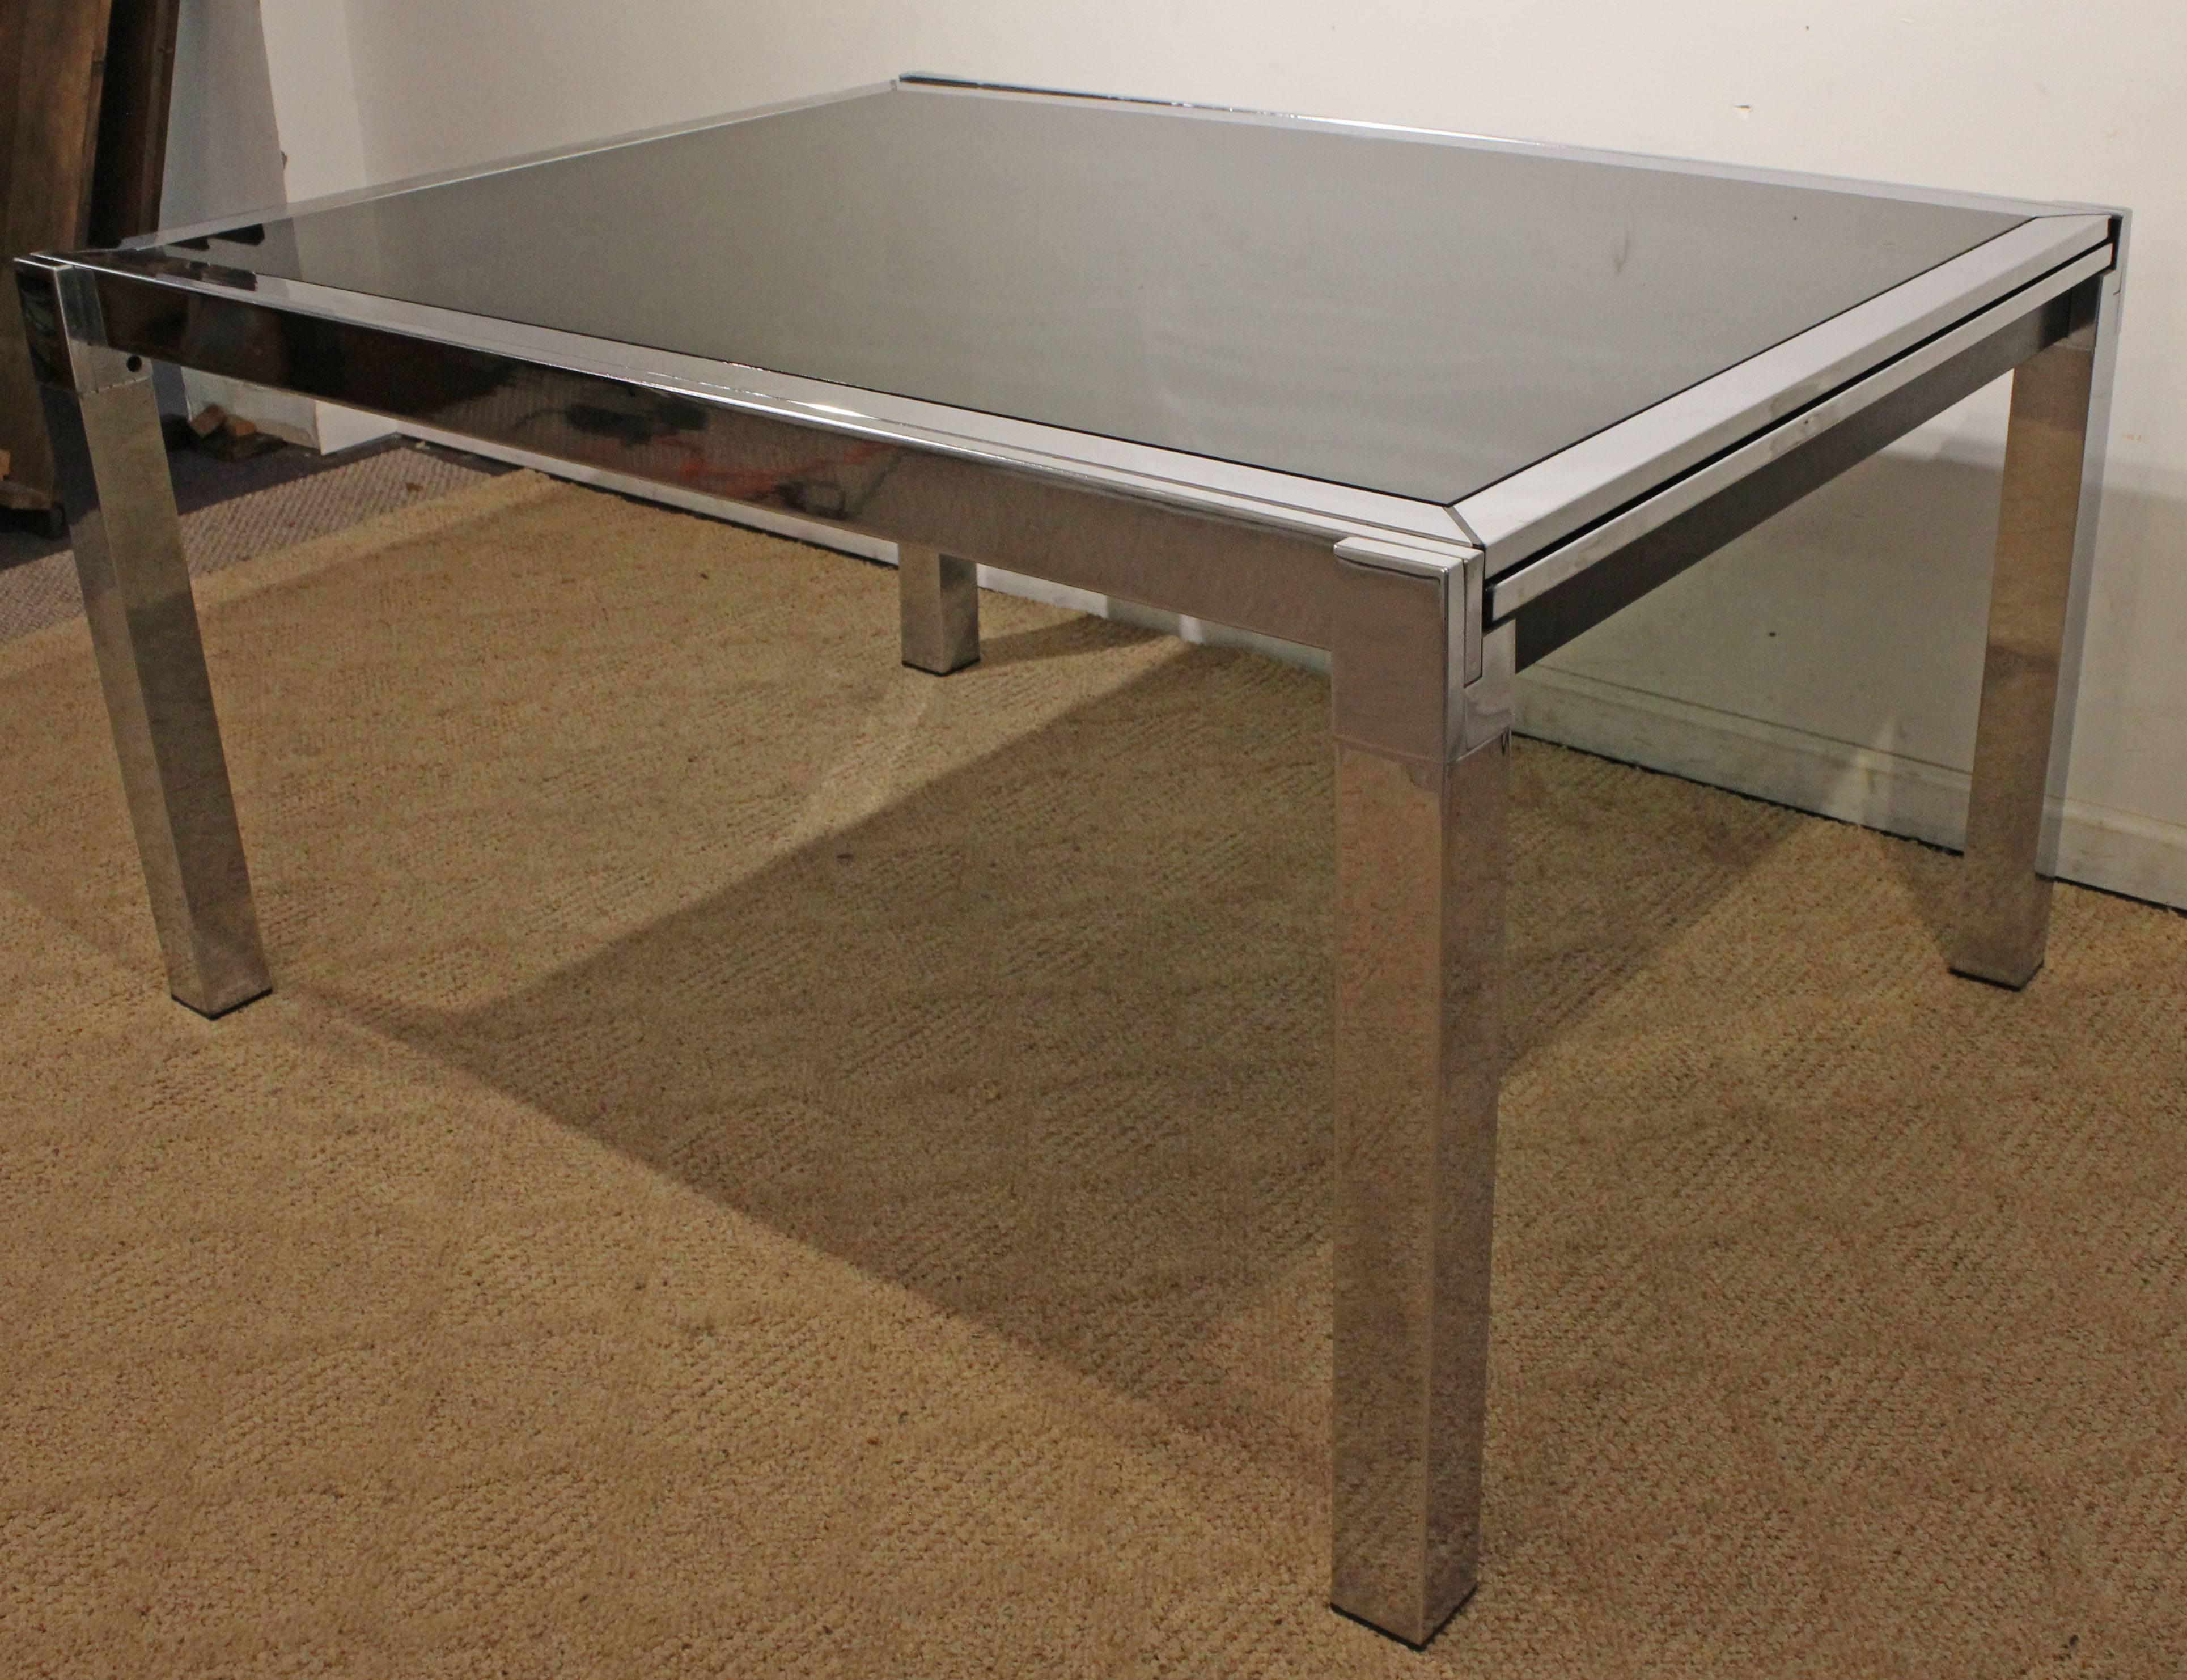 Offered is a chrome extension dining table attributed to Milo Baughman for D.I.A (Design Institute of America). This table is made of chrome with black glass. Has two hidden extensions under the tabletop. It is not signed.

Dimensions:
without